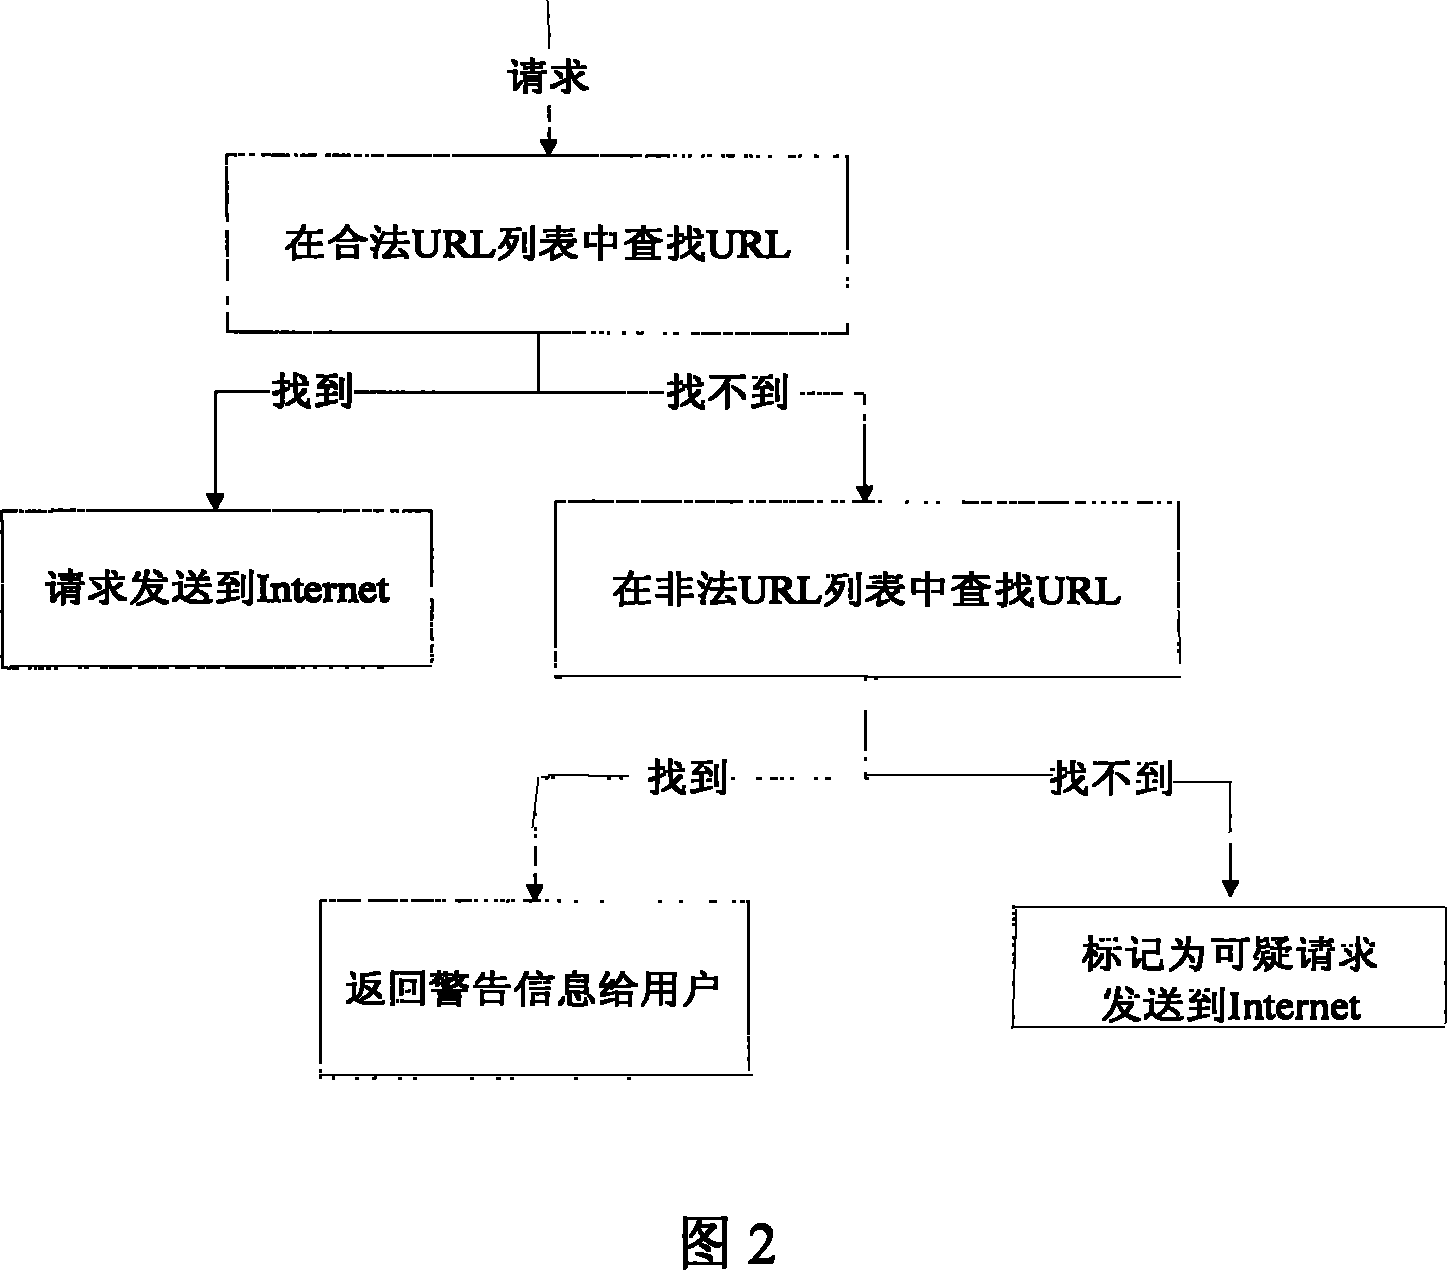 Three-folded webpage text content recognition and filtering method based on the Chinese punctuation